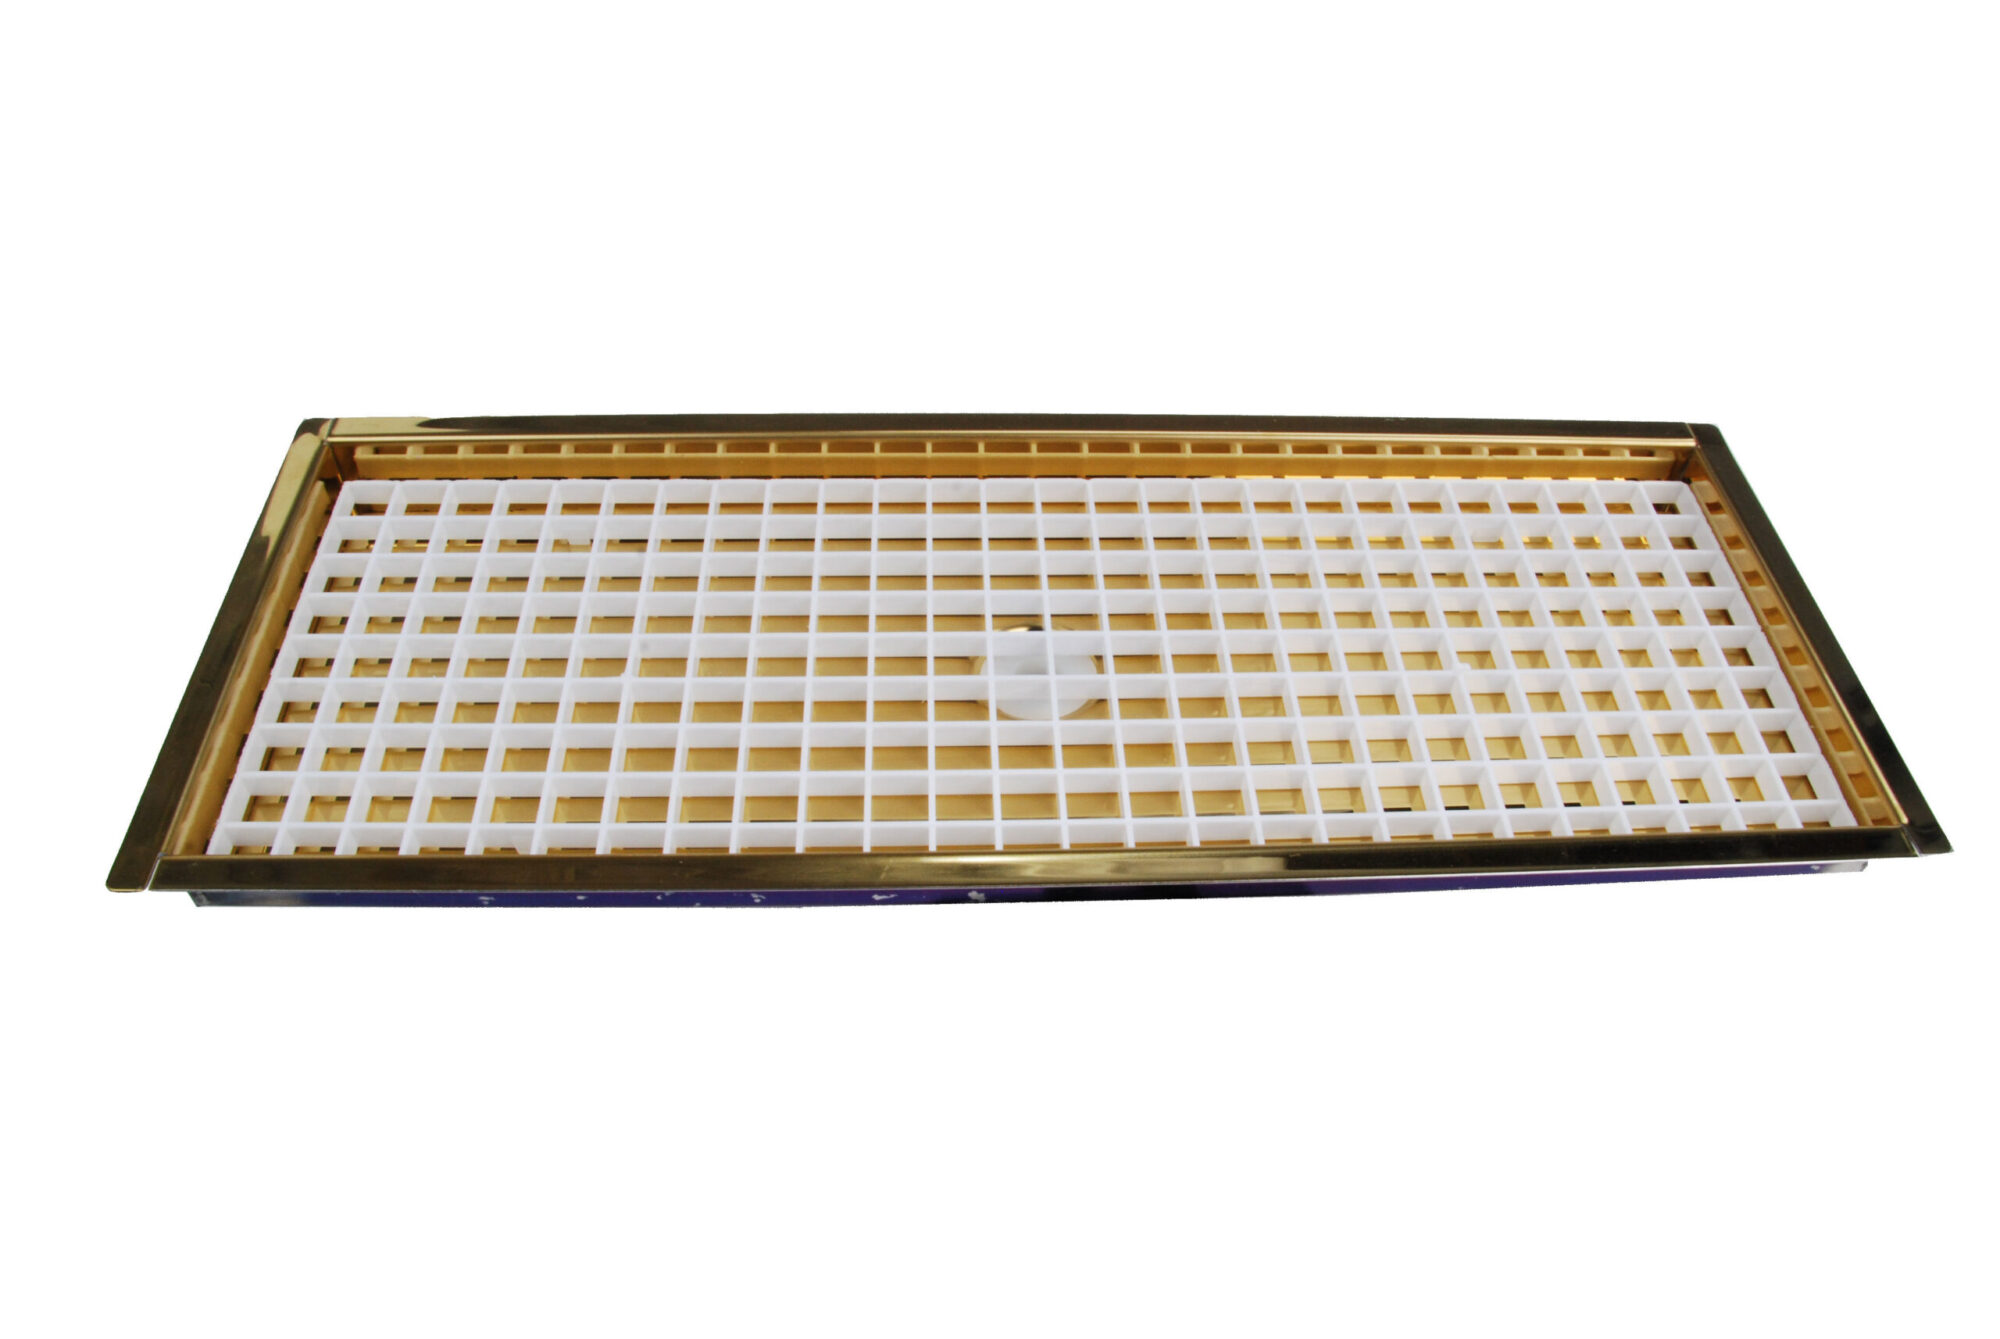 616FLB-30 PVD Brass Flush Mount Tray with Drain and Plastic Grid- 30"L x 5 3/8"W x 3/4"D